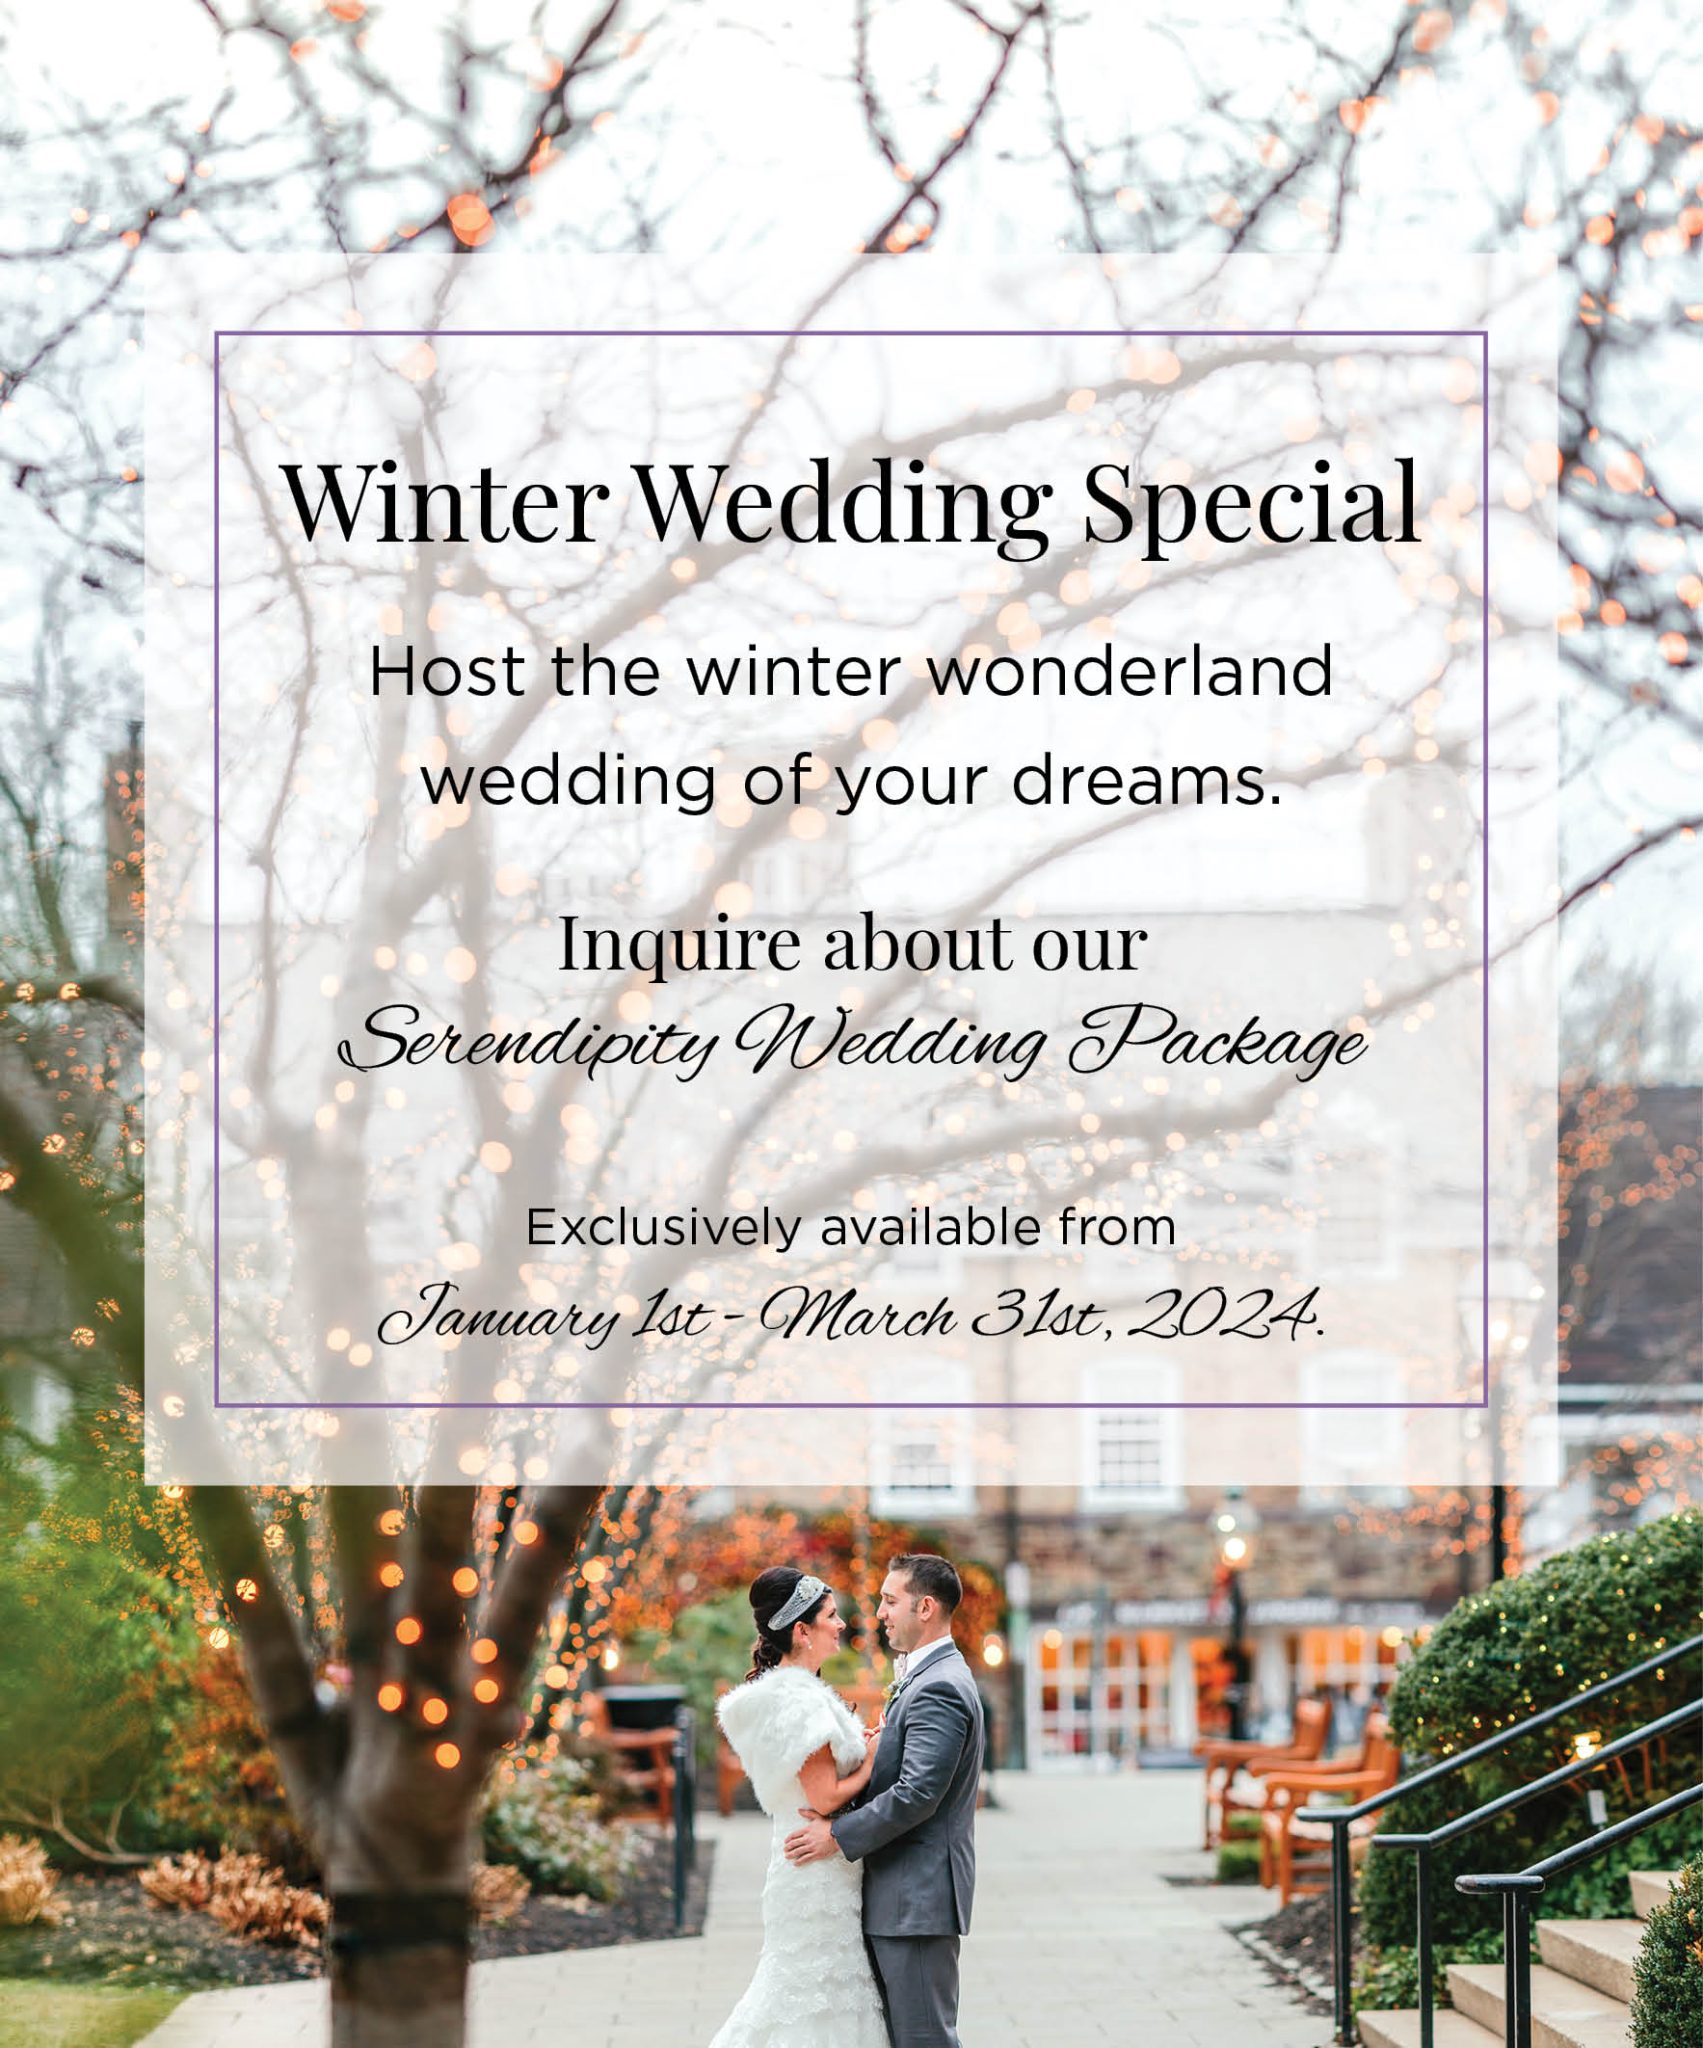 winter wedding special pop-up. Host the winter wonderland wedding of your dreams. Inquire about our Serendipity wedding package. Exclusively available from January 1st to March 31st 2024.